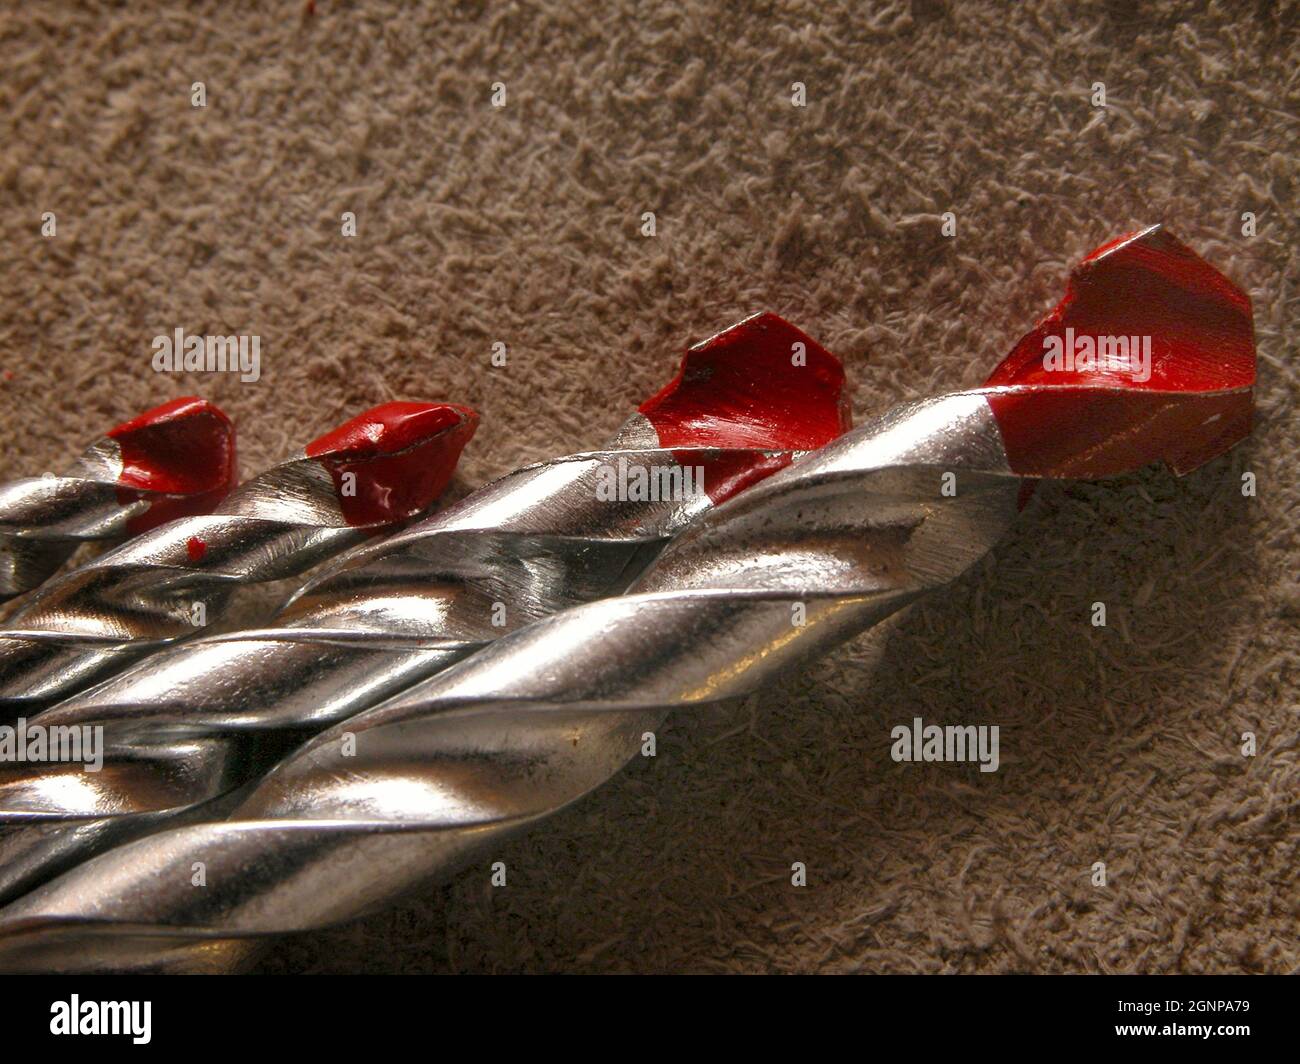 drills with red tipps Stock Photo